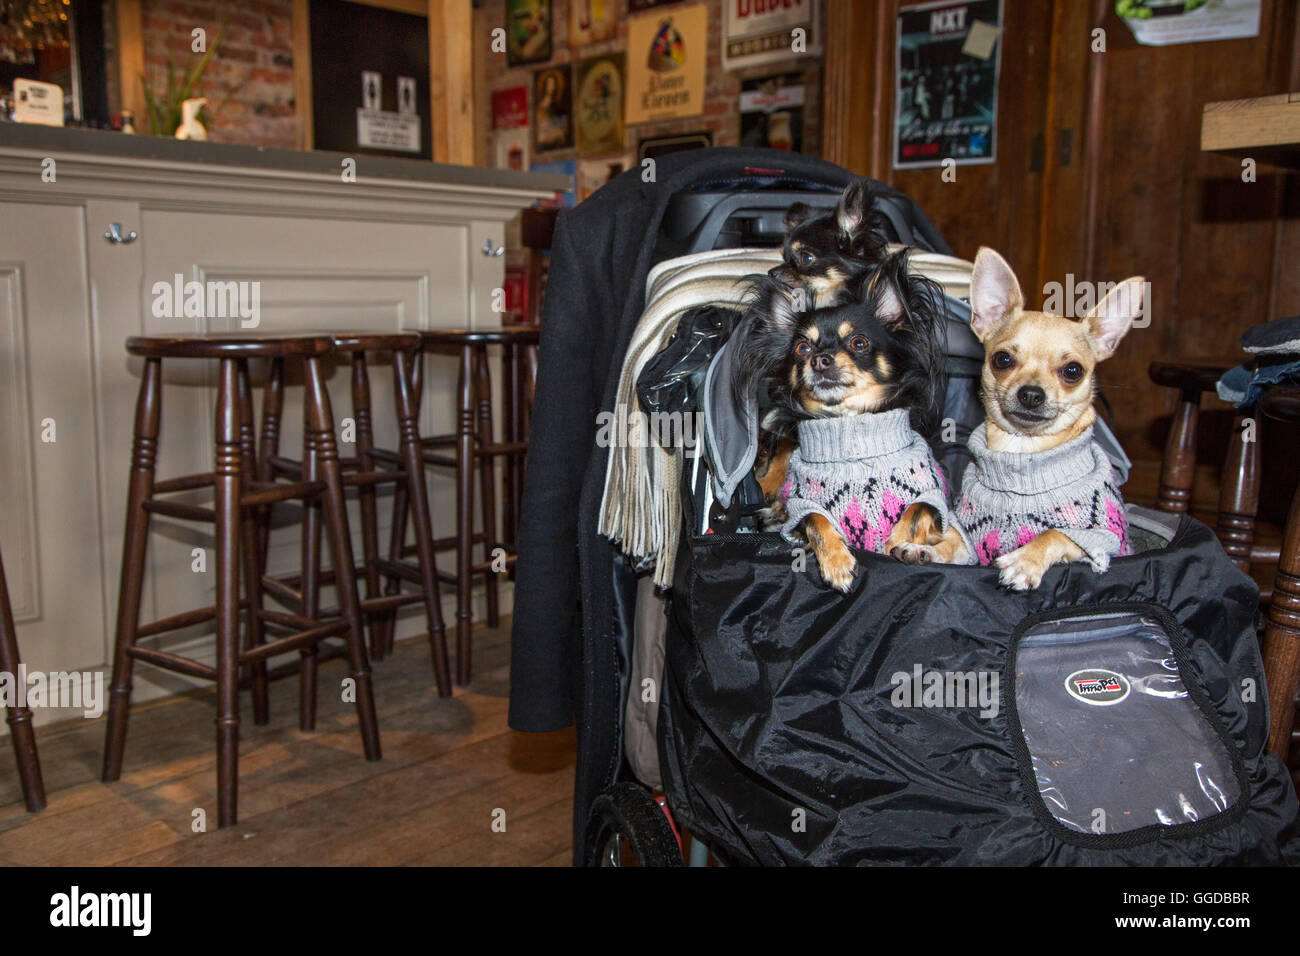 Three cute Chihuahuas in bag wearing dog clothes in pub Stock Photo